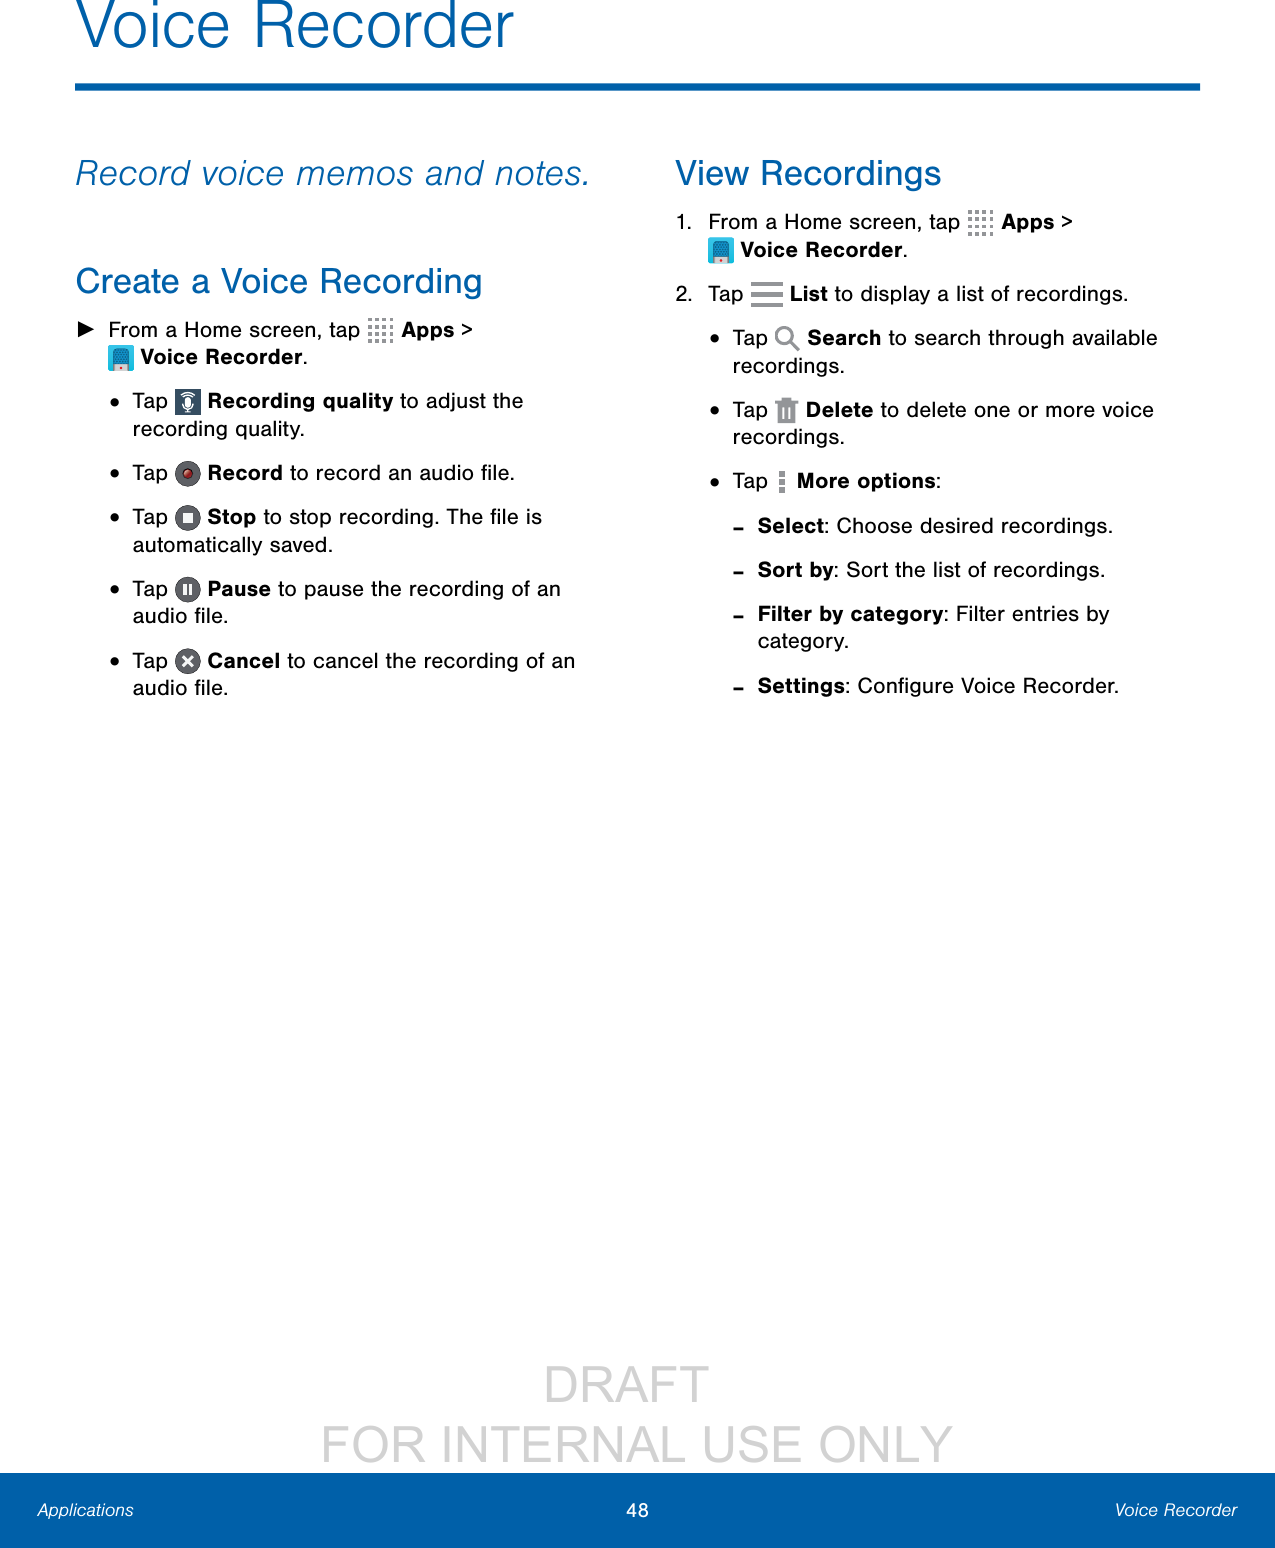                 DRAFT FOR INTERNAL USE ONLY48 Voice RecorderApplicationsVoice RecorderRecord voice memos and notes.Create a Voice Recording ►From a Home screen, tap  Apps &gt; VoiceRecorder.•  Tap   Recording quality to adjust the recording quality.•  Tap   Record to record an audio ﬁle.•  Tap   Stop to stop recording. The ﬁle is automatically saved.•  Tap   Pause to pause the recording of an audio ﬁle.•  Tap   Cancel to cancel the recording of an audio ﬁle.View Recordings1.  From a Home screen, tap  Apps &gt; VoiceRecorder.2.  Tap   List to display a list of recordings.•  Tap   Search to search through available recordings.•  Tap   Delete to delete one or more voice recordings.•  Tap  More options: -Select: Choose desired recordings. -Sort by: Sort the list of recordings. -Filter by category: Filter entries by category. -Settings: Conﬁgure Voice Recorder.